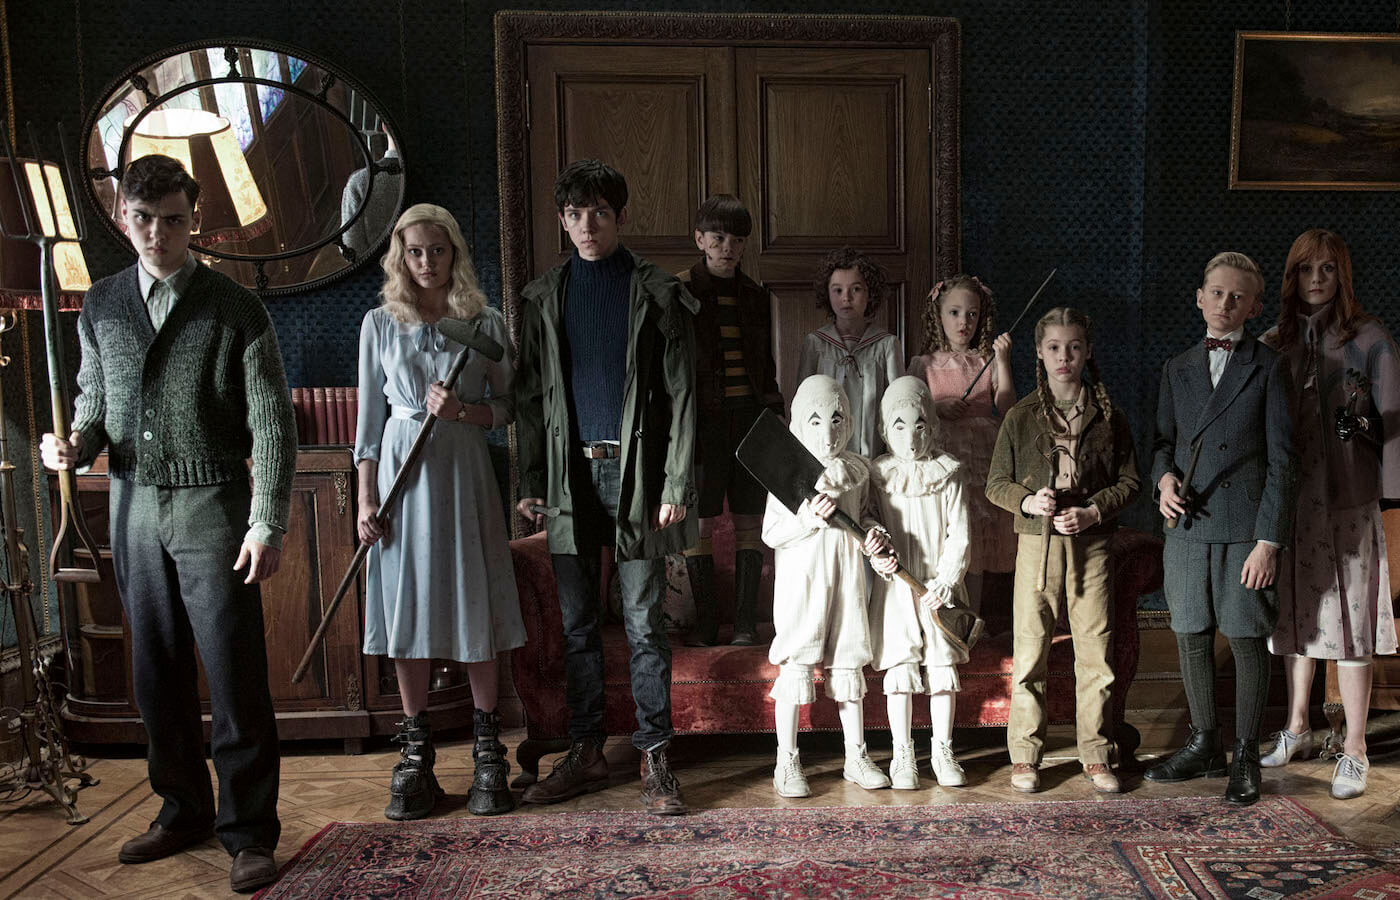 Miss peregrines home for peculiar children movie characters